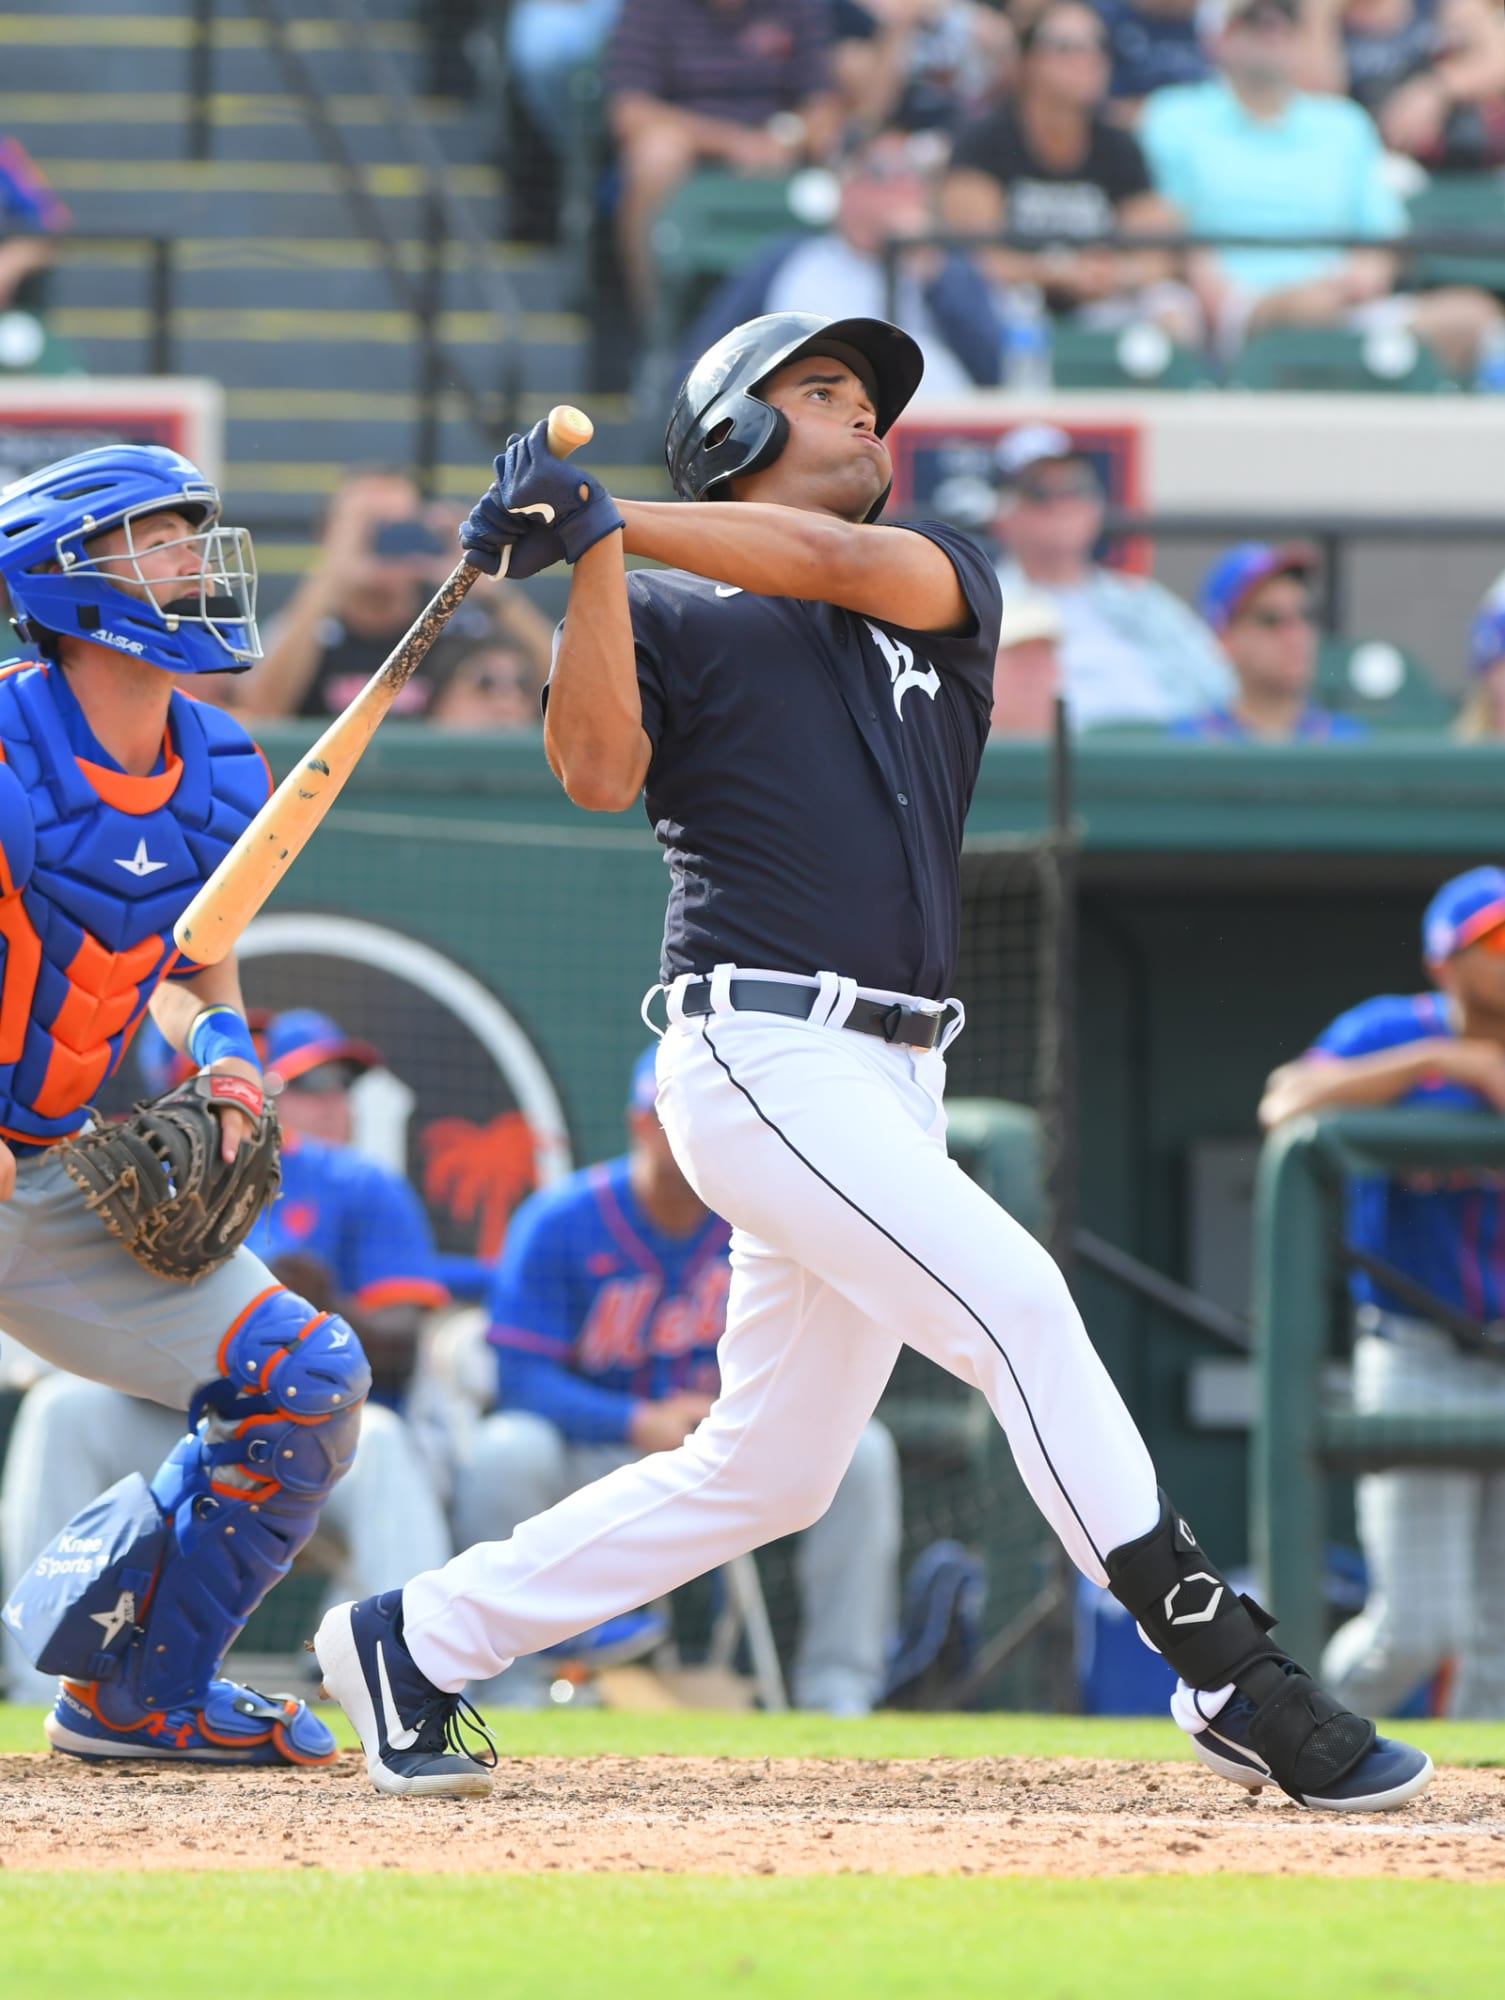 Detroit Tigers Top Prospects The Lists are Coming!